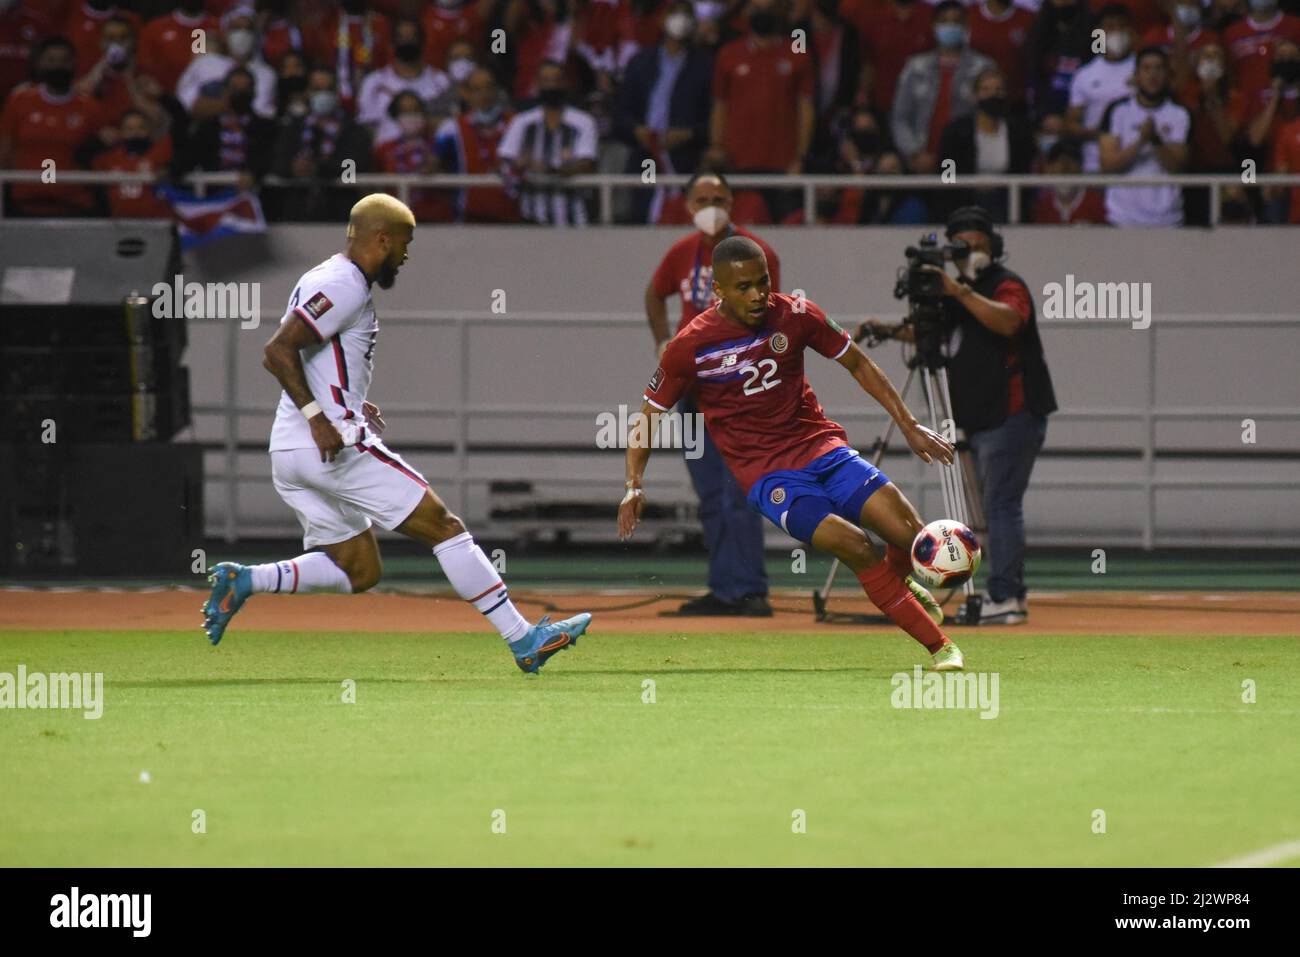 SAN JOSE, Costa Rica: USA player Deandre Yedlin (L) and Costarican player Ian Lawrence (R) in action during the 2-0 Costa Rica victory over USA in the Stock Photo